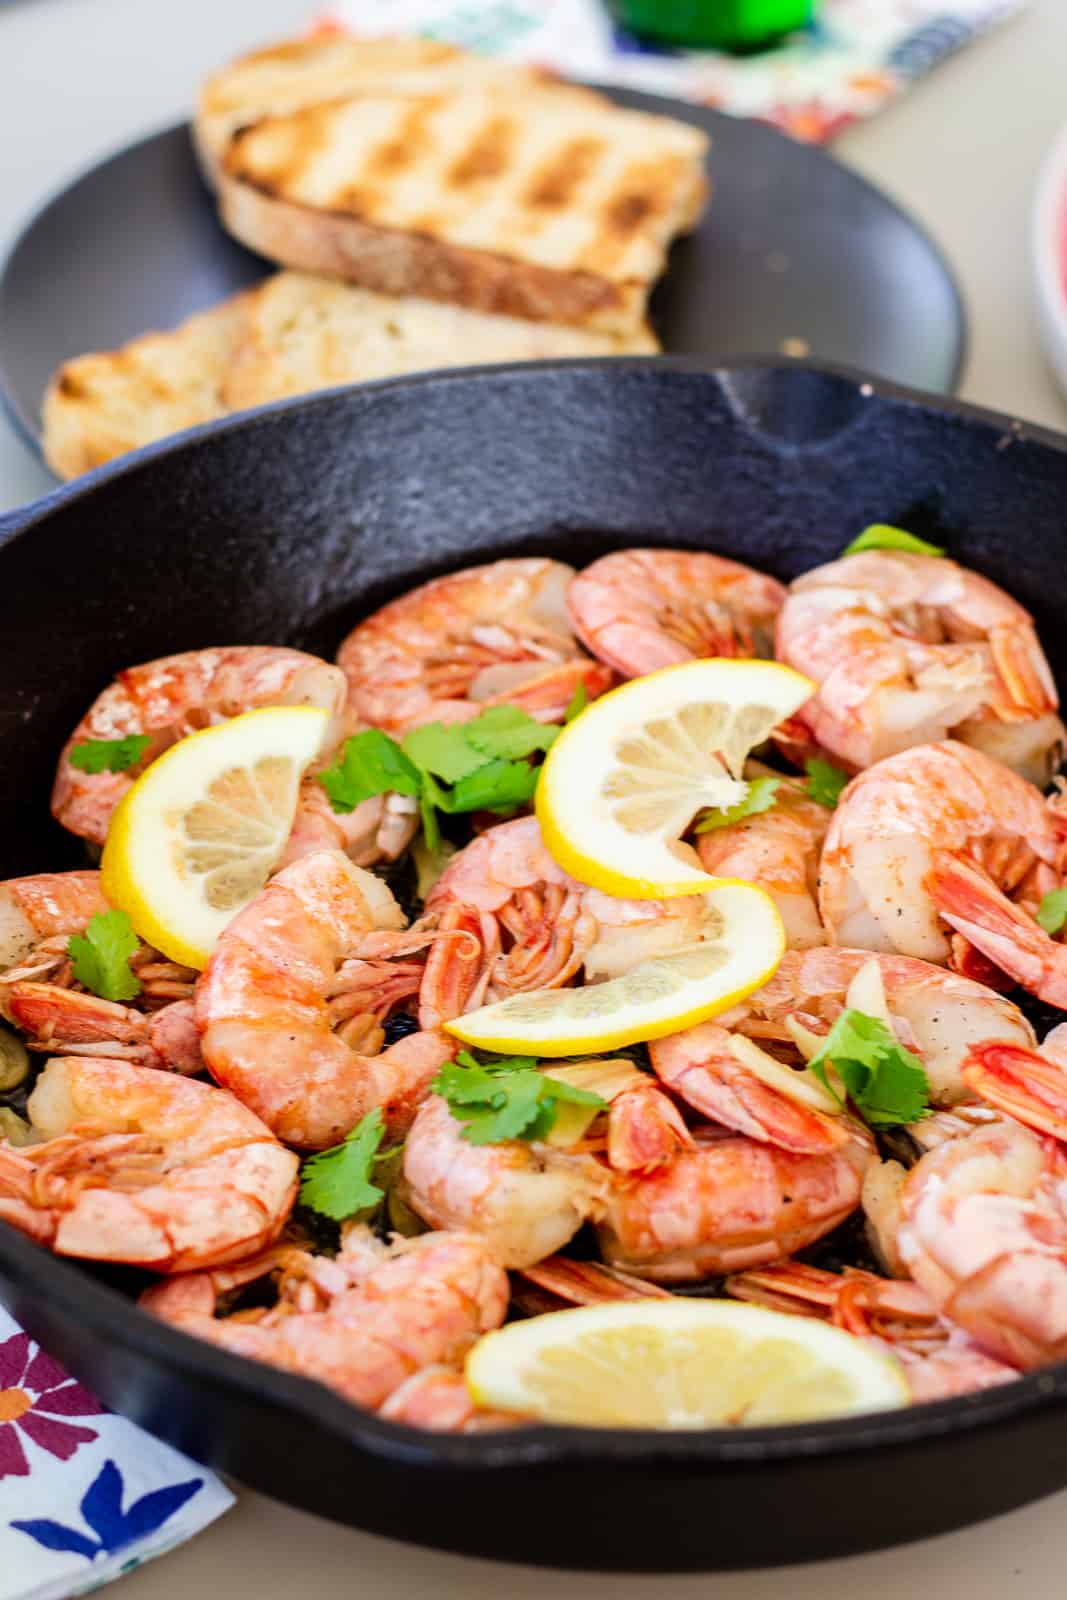 Shrimp in a cast iron skillet garnished with lemon slices and cilantro leaves.